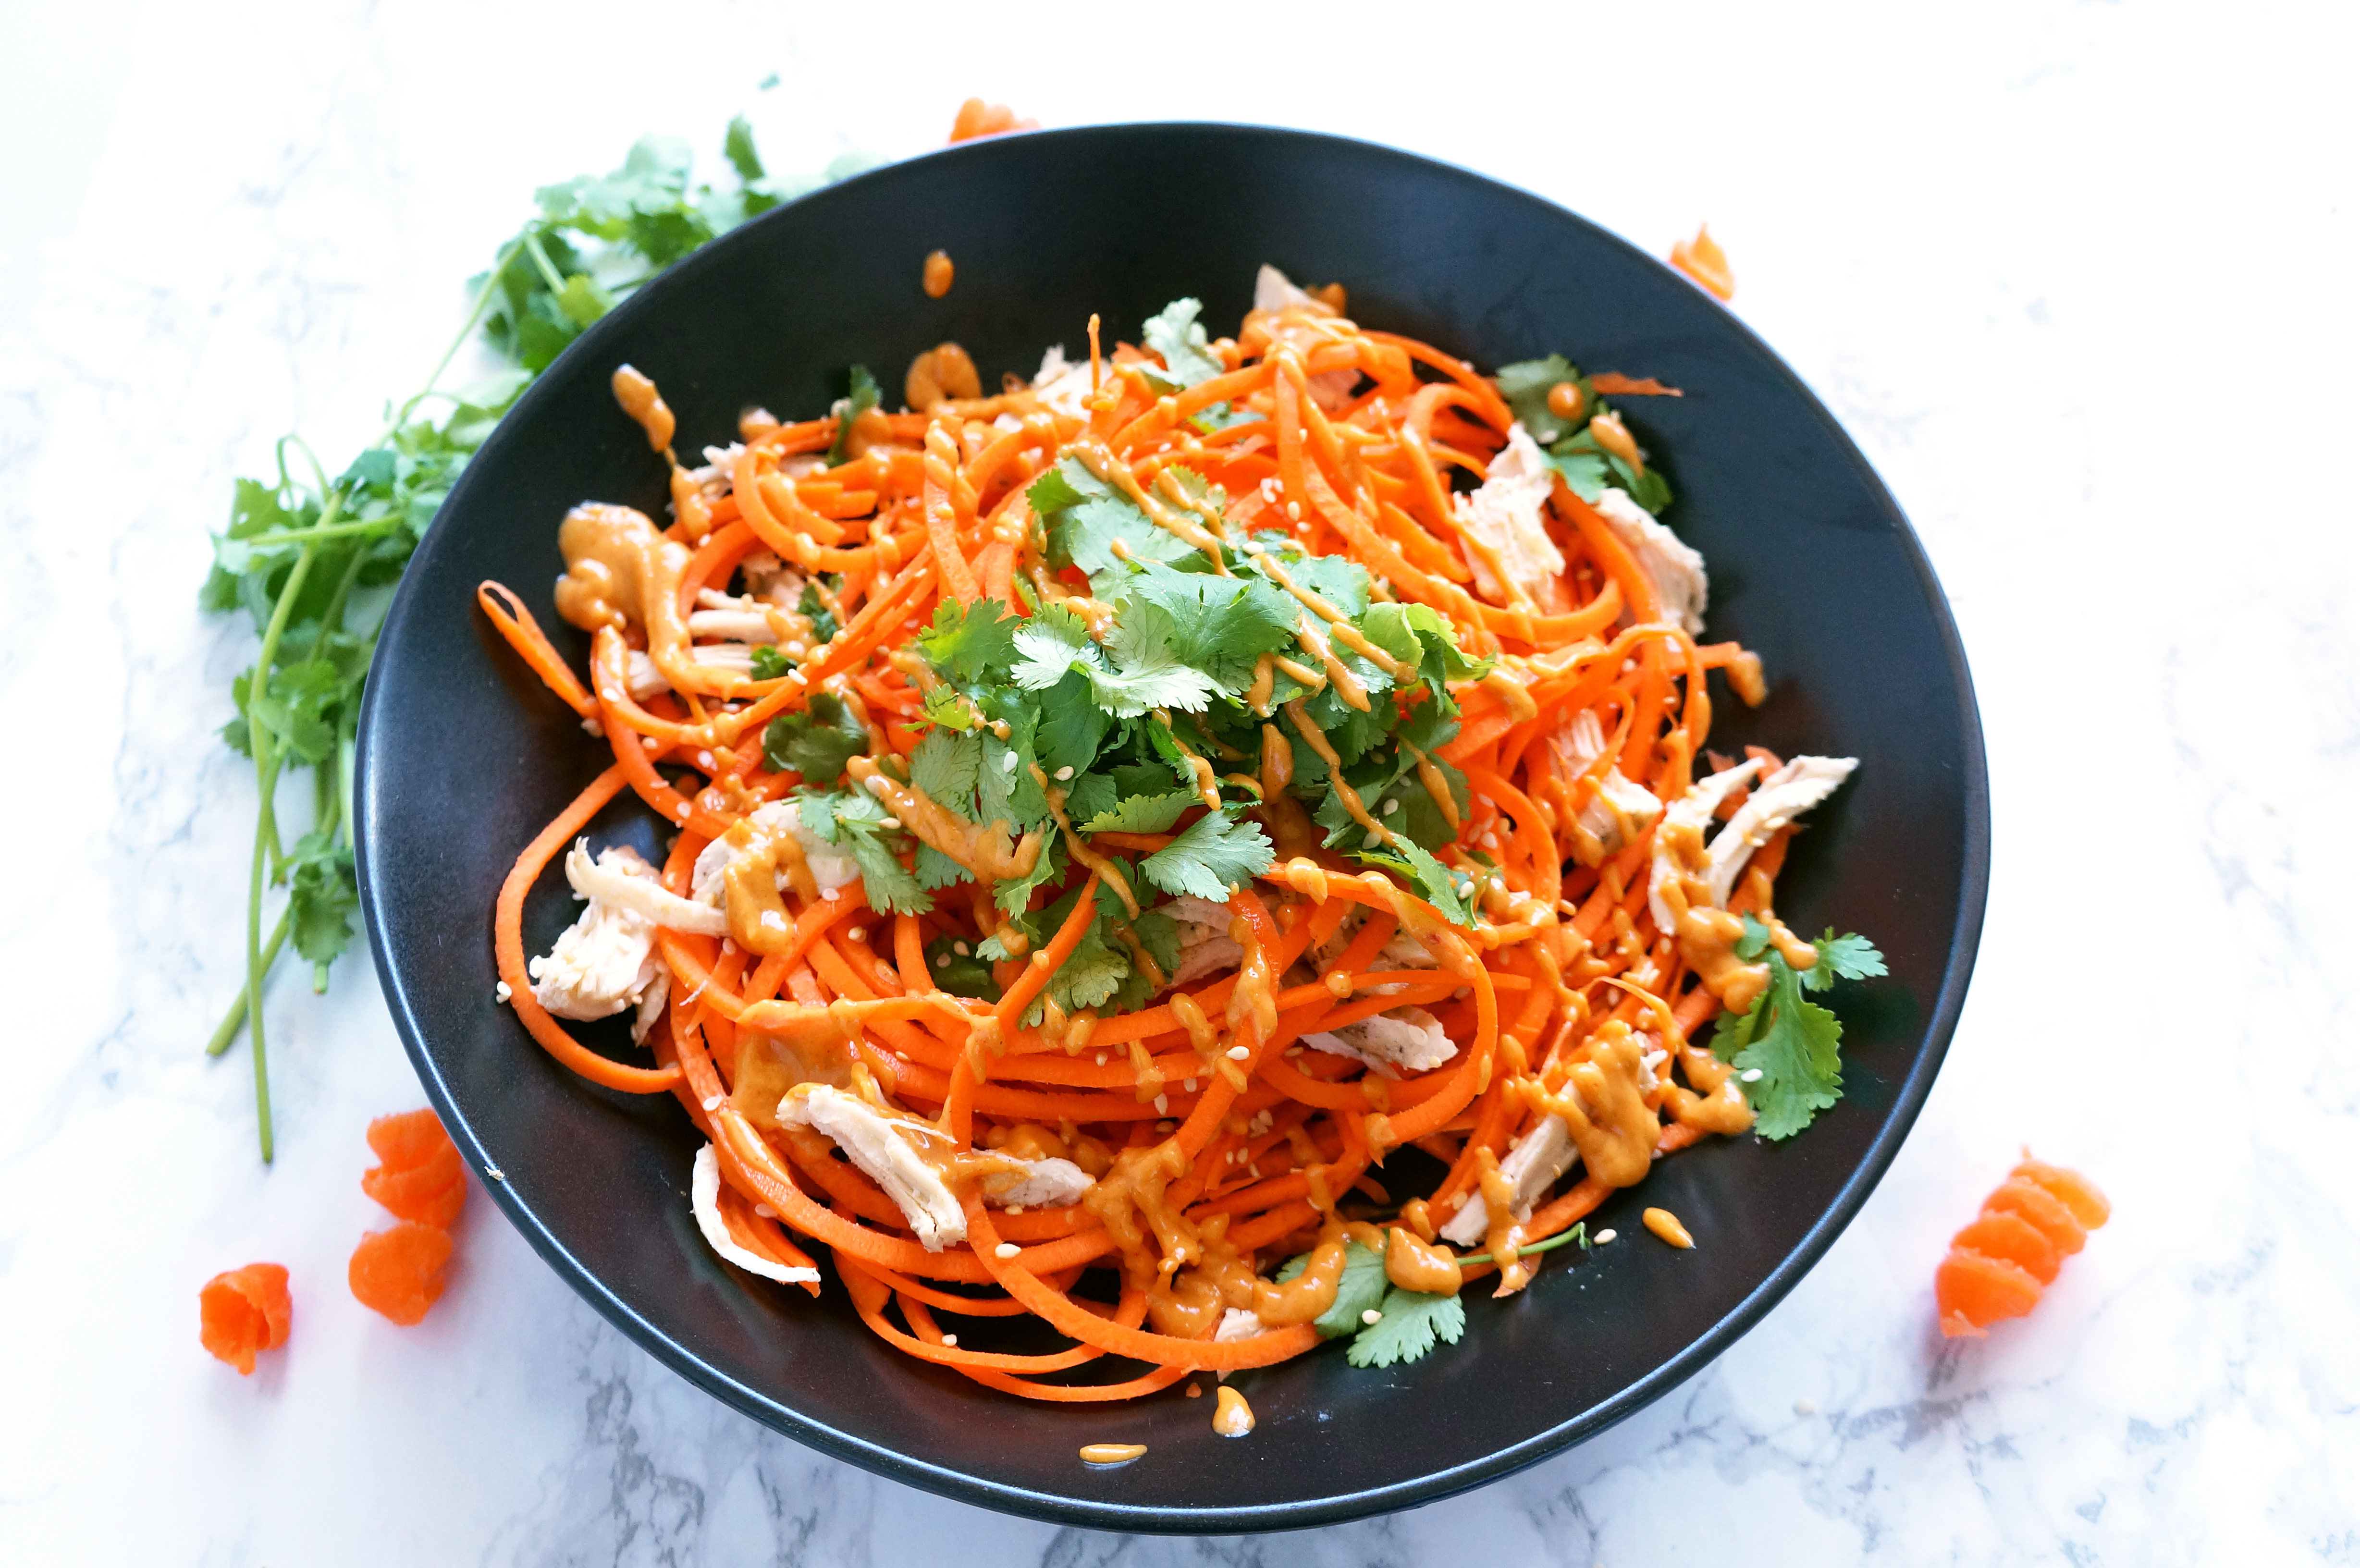 Carrot noodles with ginger curry sauce